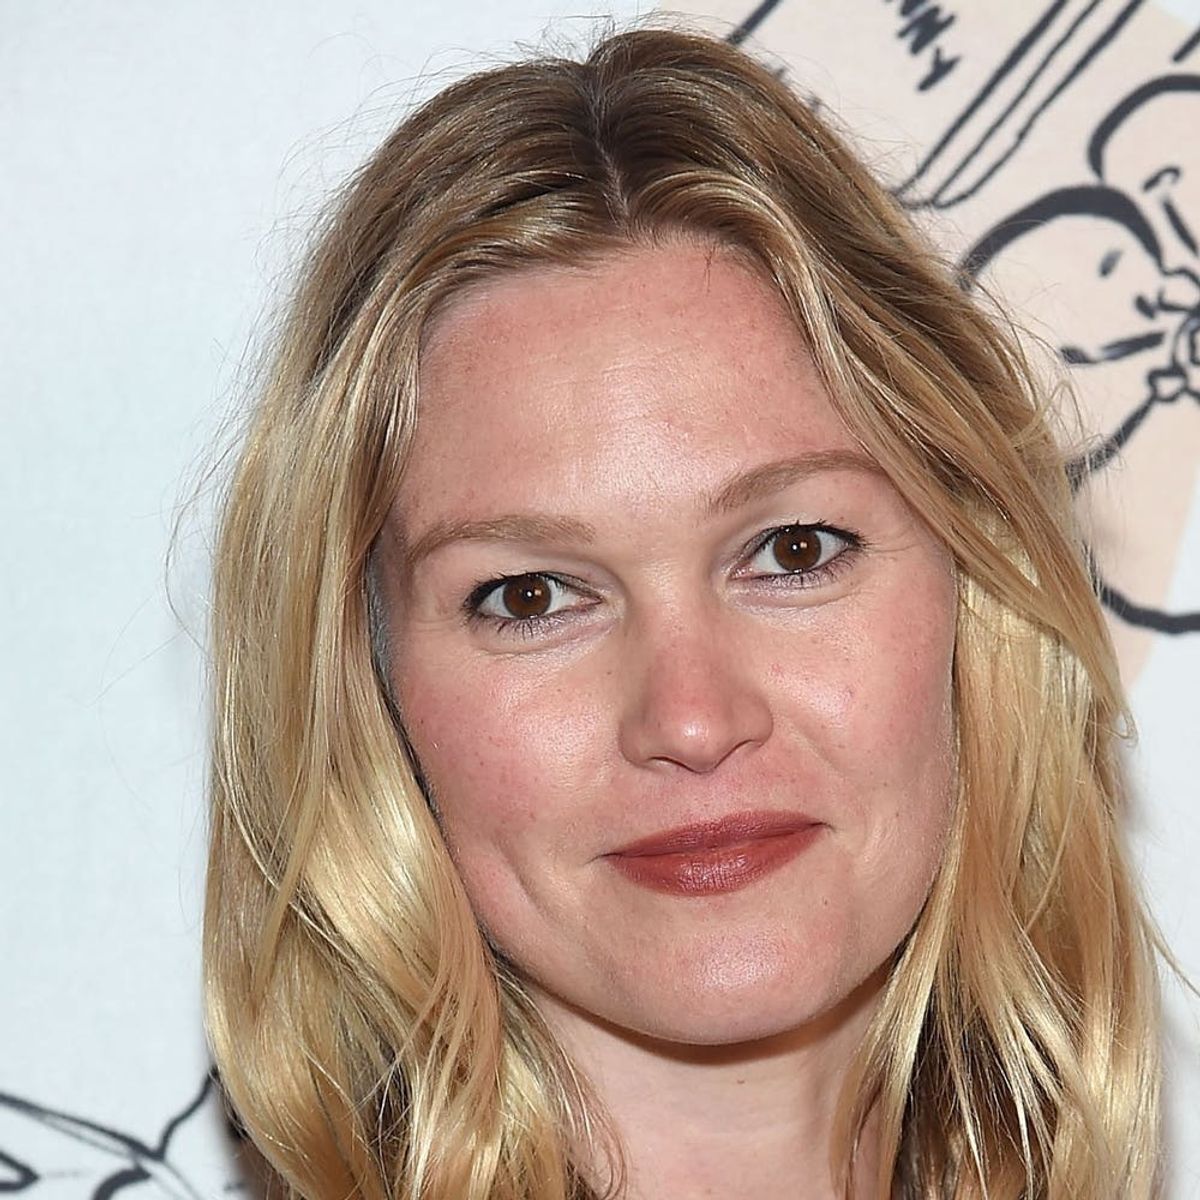 Julia Stiles Had the BEST Response for Mommy Shamers Accusing Her of Holding Her Baby Improperly